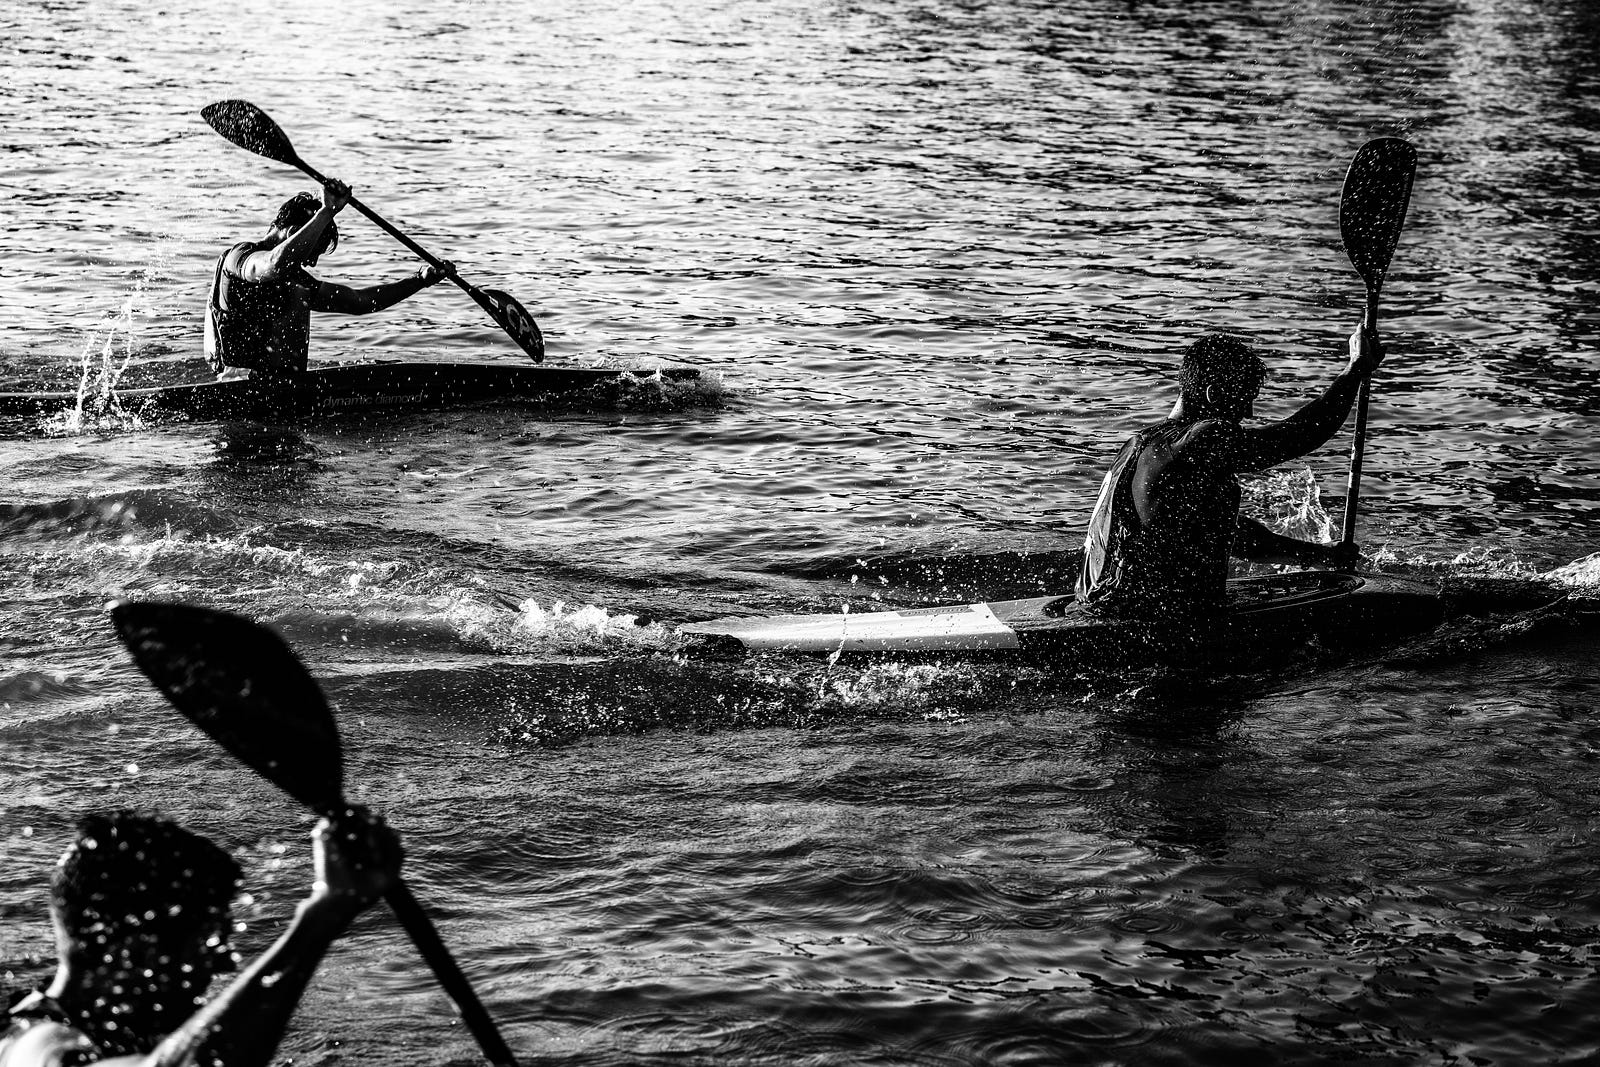 Black and white image of three kayakers working hard on flat water. They are owning the suck.